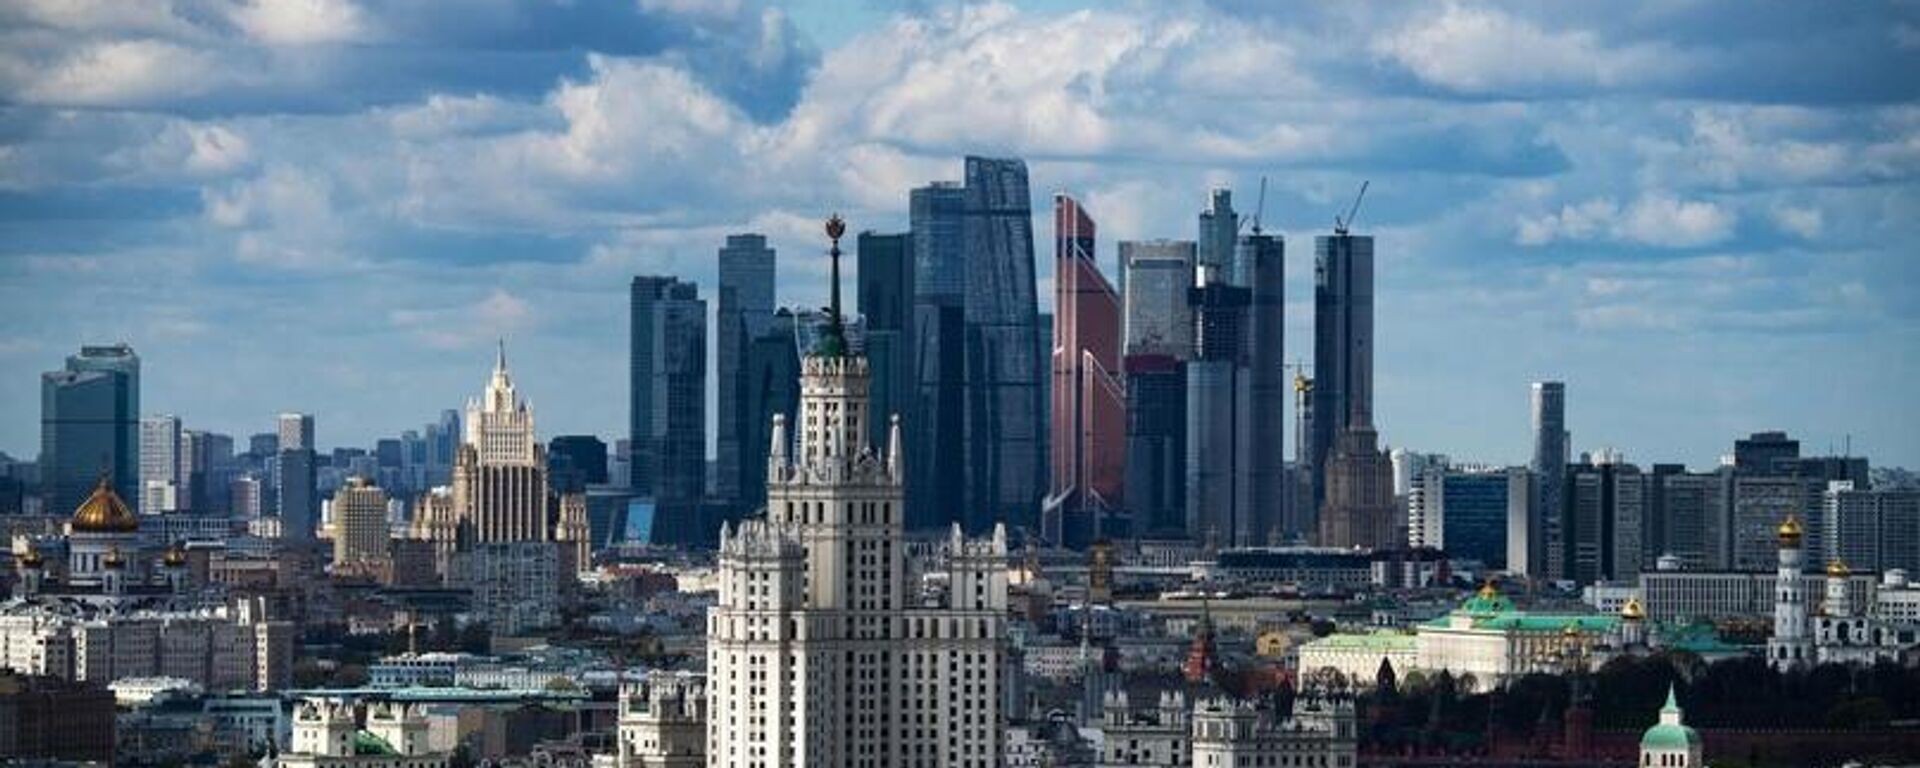 A general view shows the Soviet era skyscraper on Kotelnicheskaya Embankment of the Moskva river, Foreign ministry headquarters, Radisson Royal Hotel Moscow, the Christ the Savior cathedral and the Kremlin, with the Moscow International Business Centre, also known as Moskva-City, seen in te background, in Moscow, Russia - Sputnik International, 1920, 20.12.2022